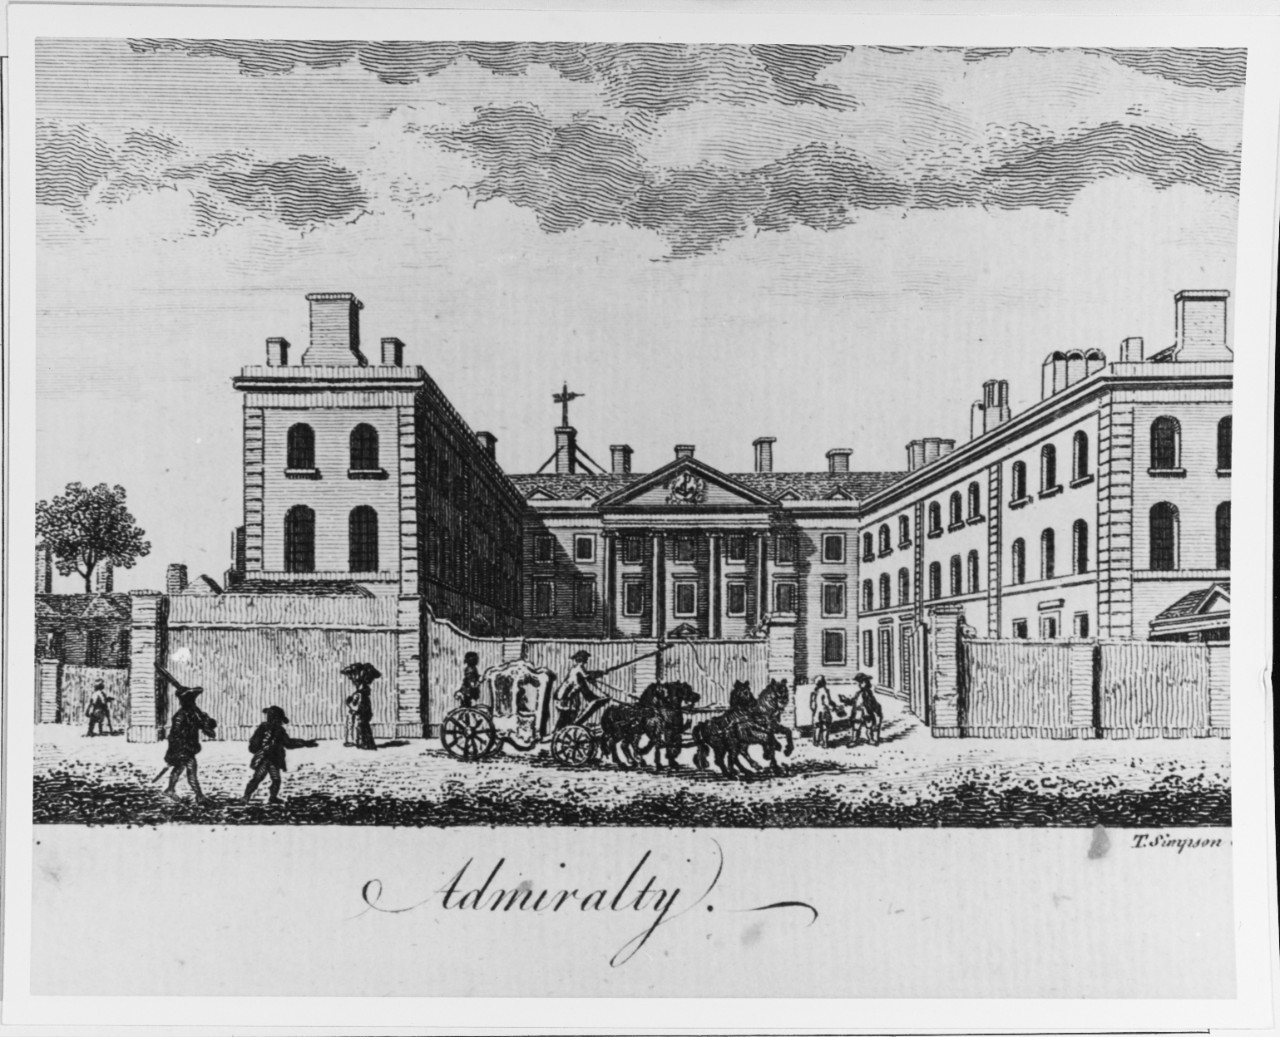 The Admiralty, London